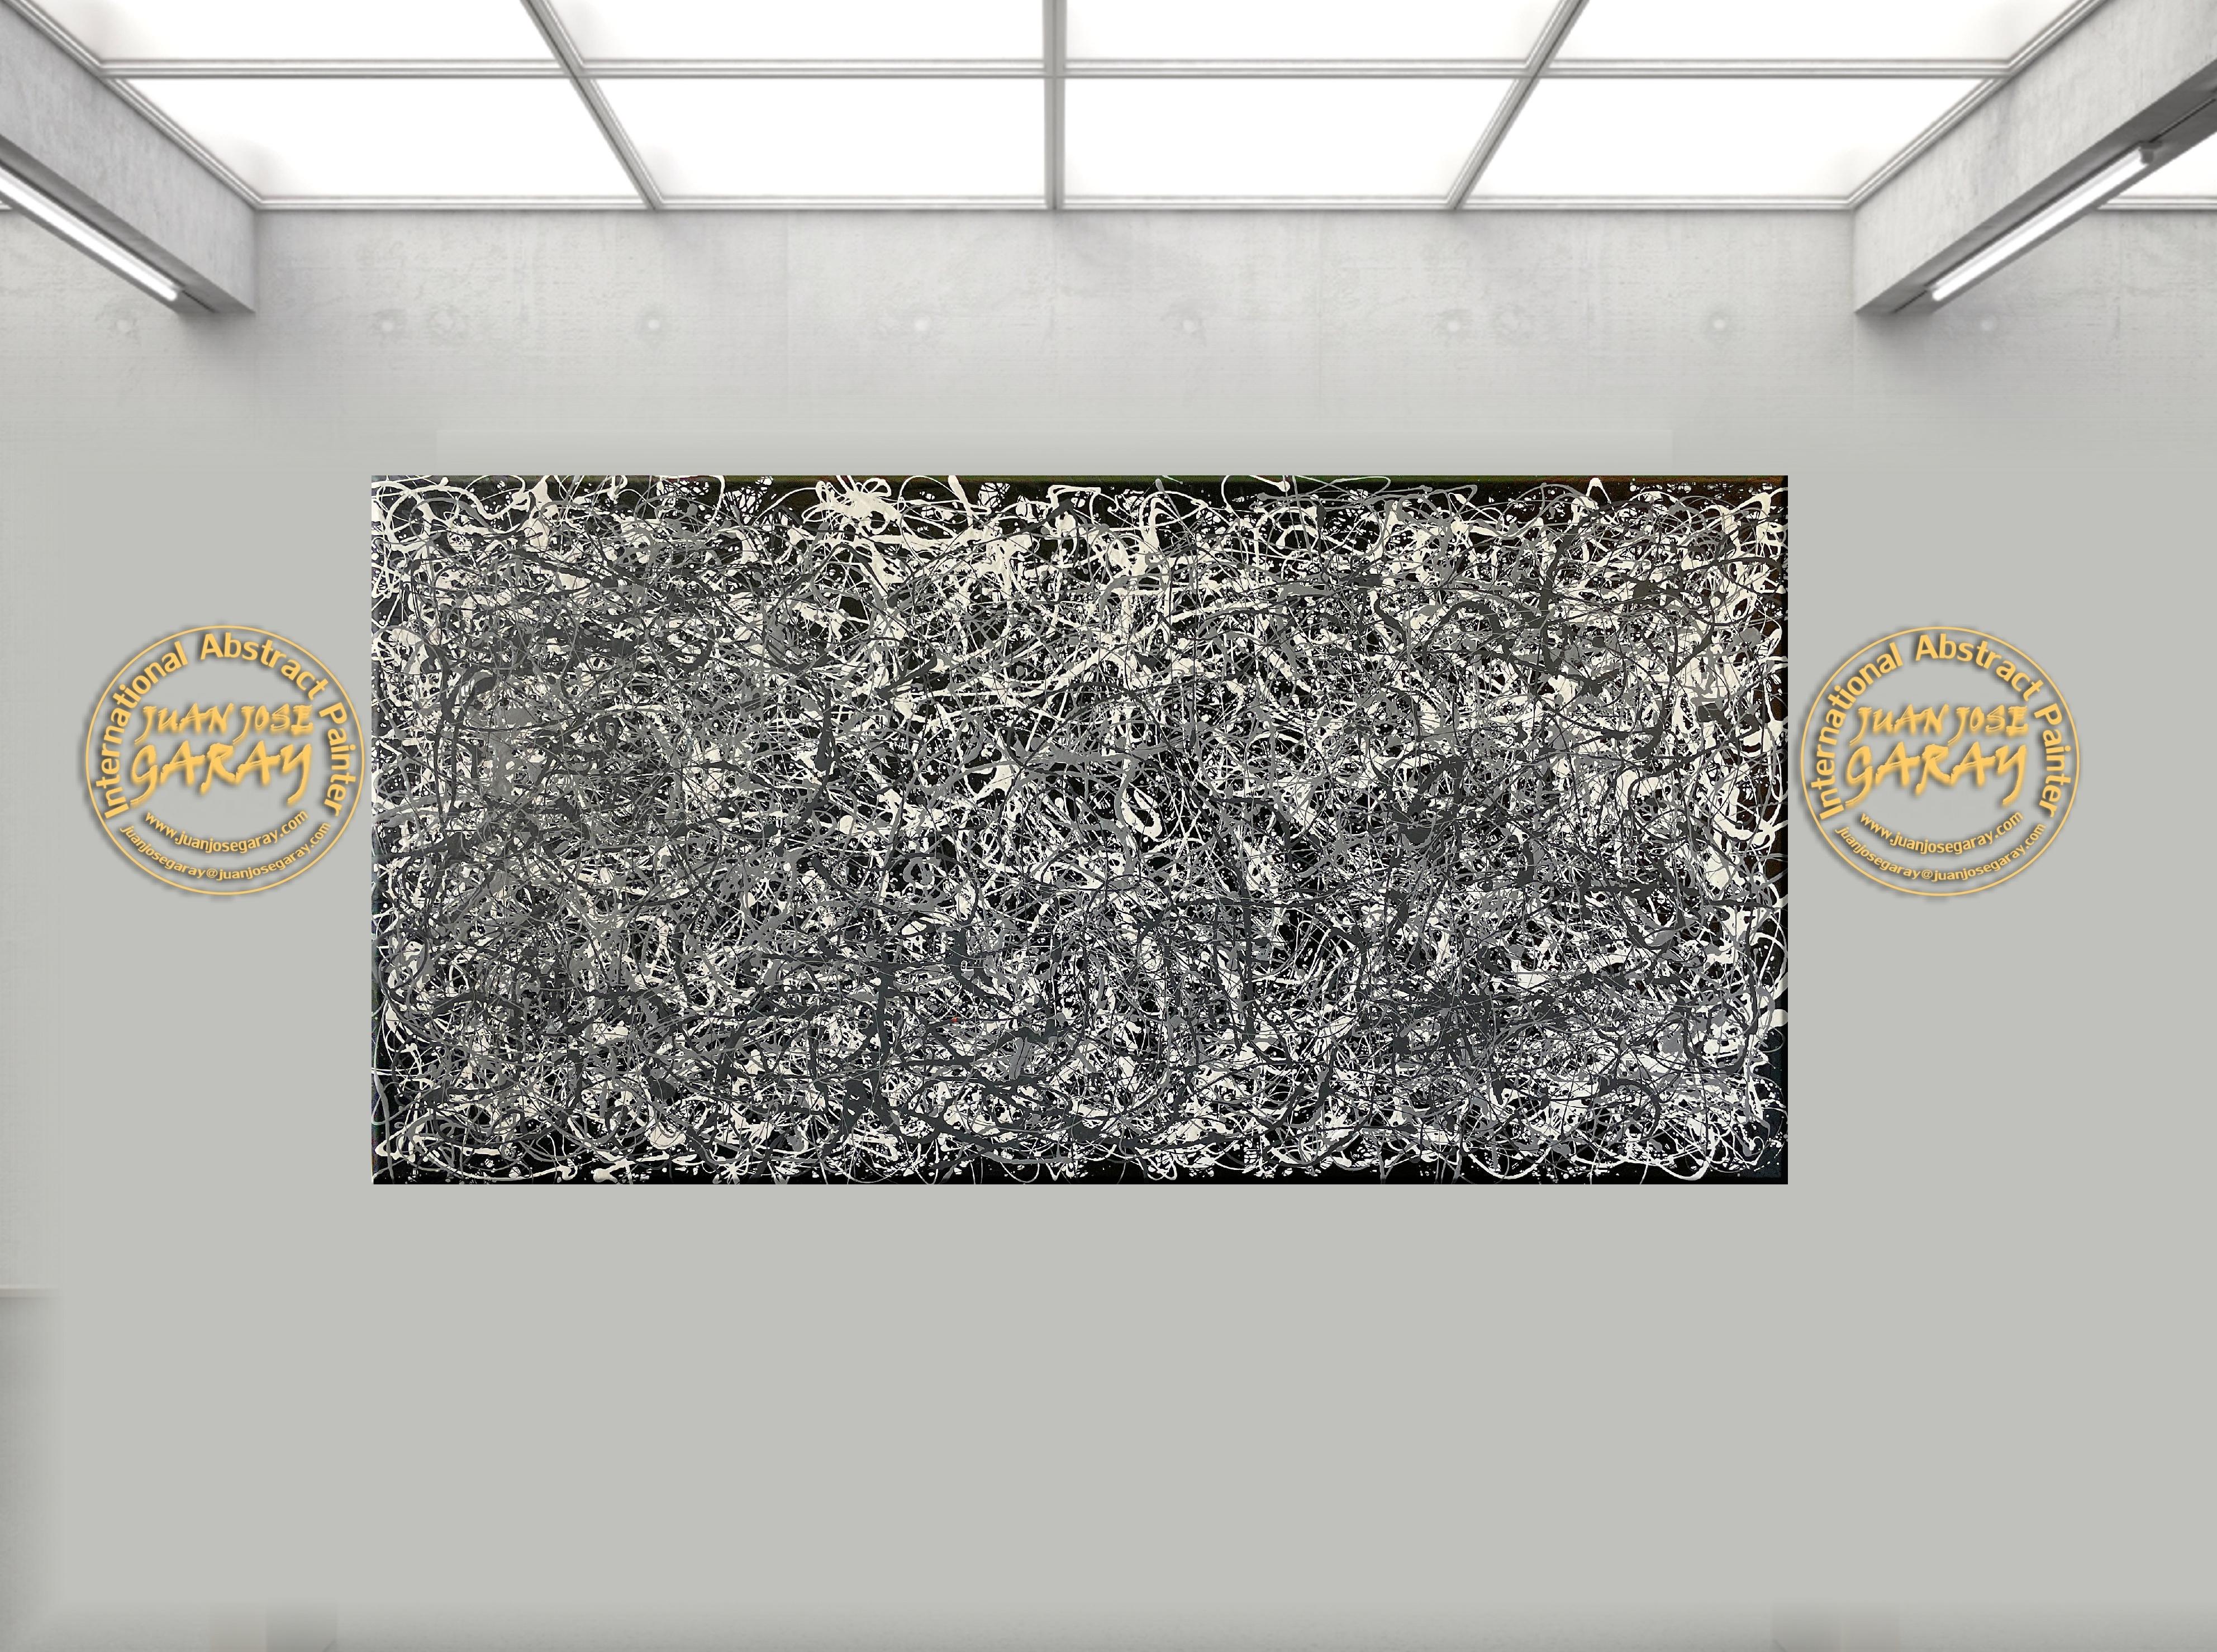 Shipped rolled in a tube without frame

In this enigmatic work of art in the style, the canvas is saturated with an intriguing interplay of white, black, and gray. The white tones seem to glide and twist, like dancing spirits emerging from the